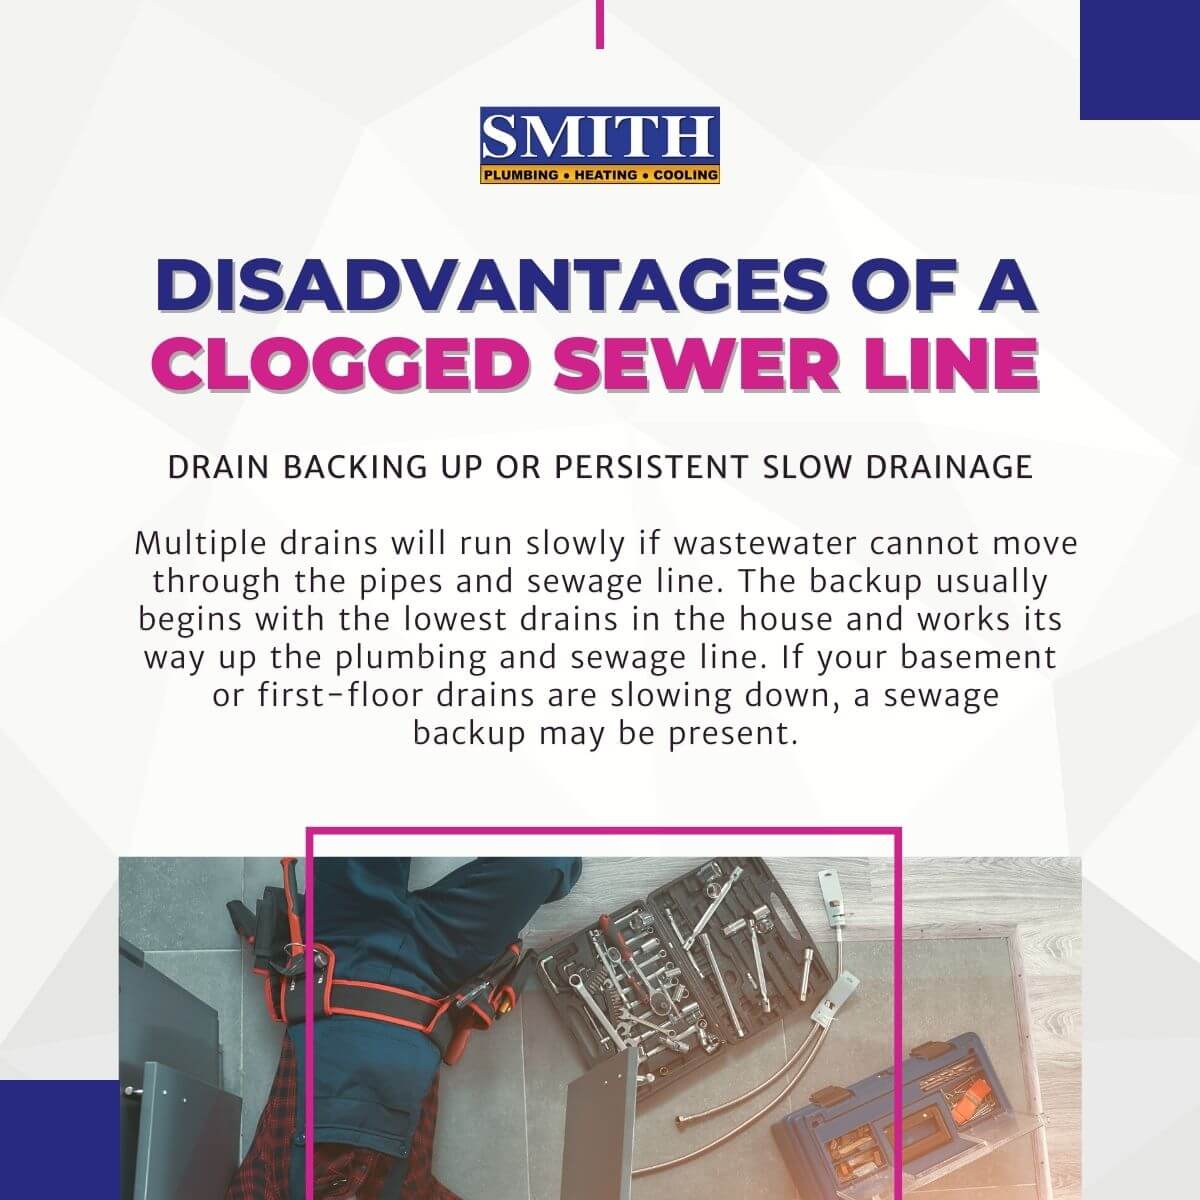 Disadvantages of a clogged sewer line page 2